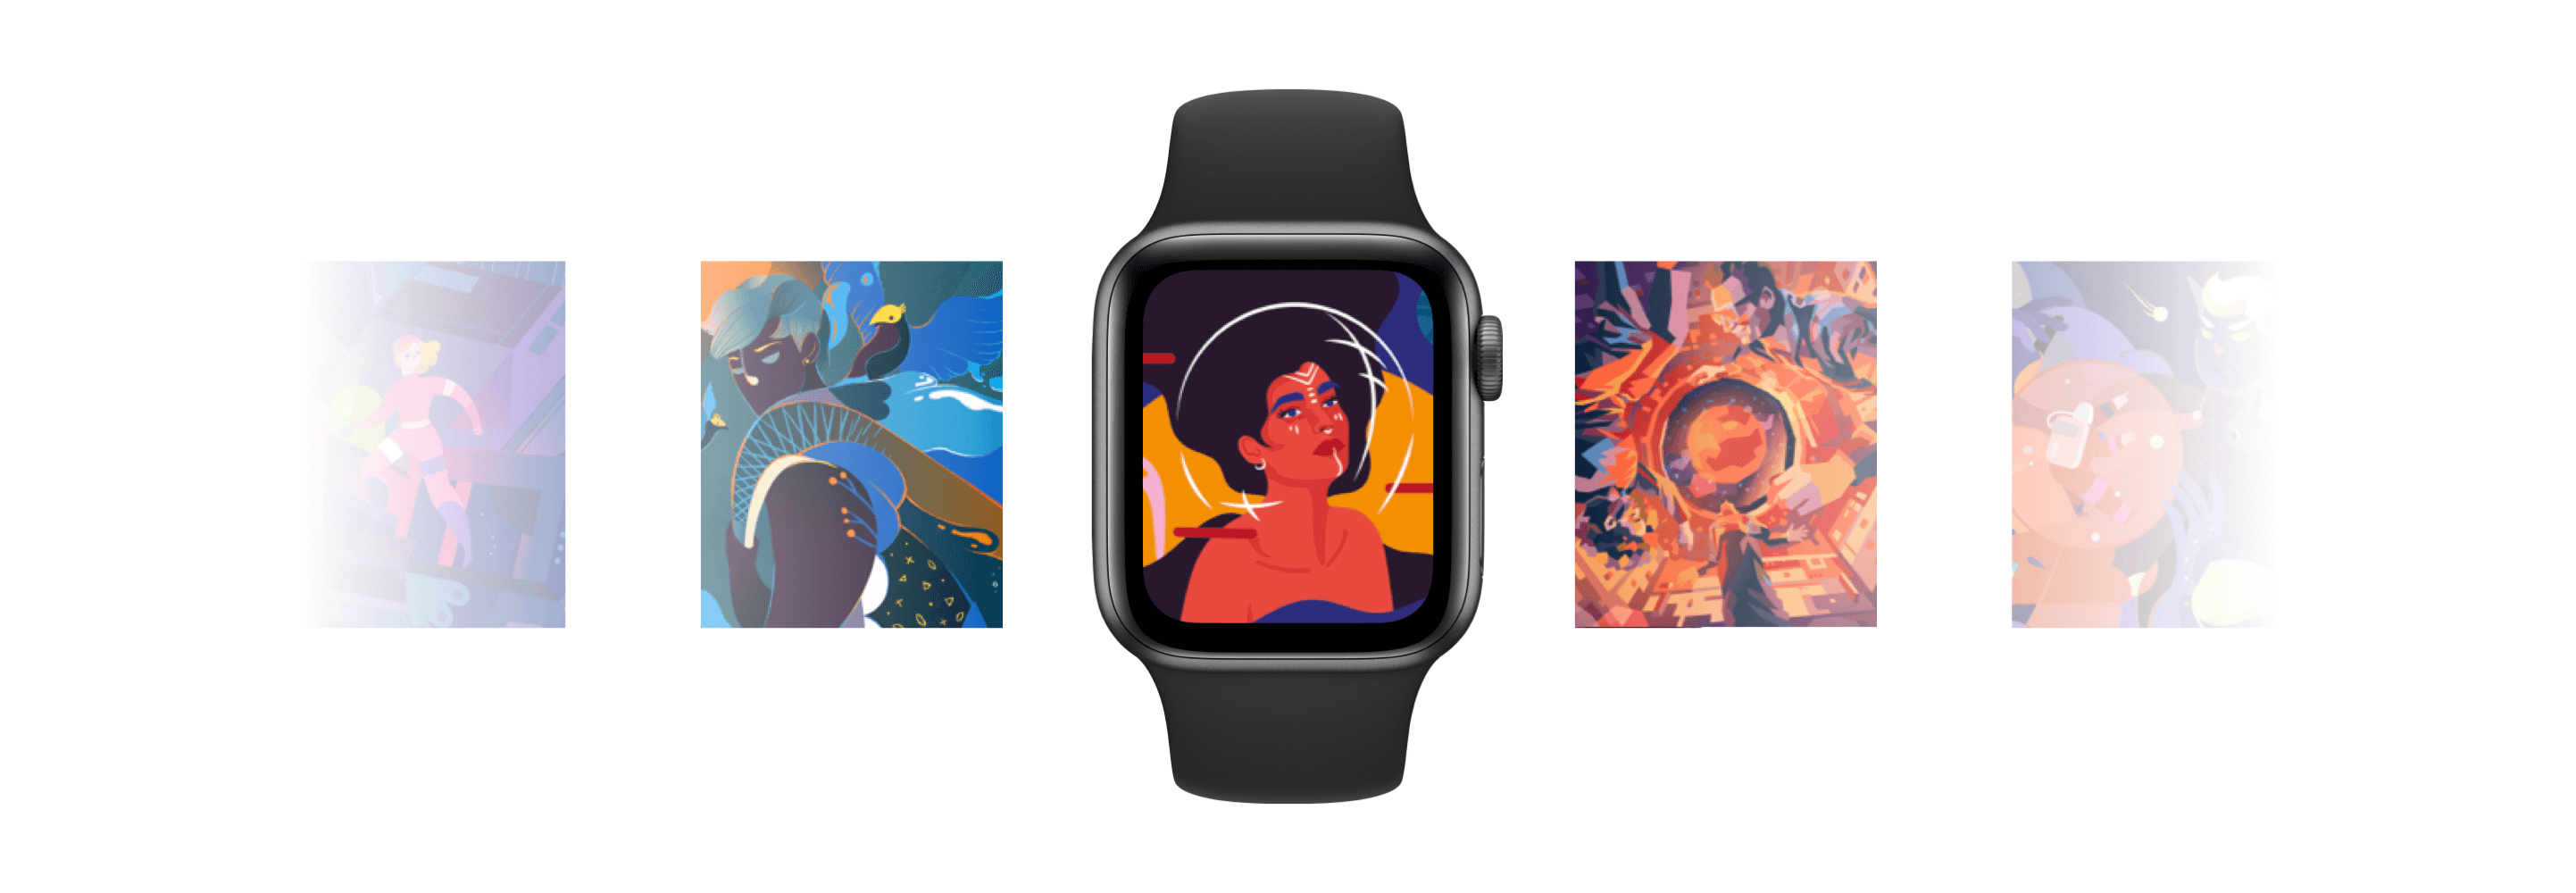 Apple watch with different skins